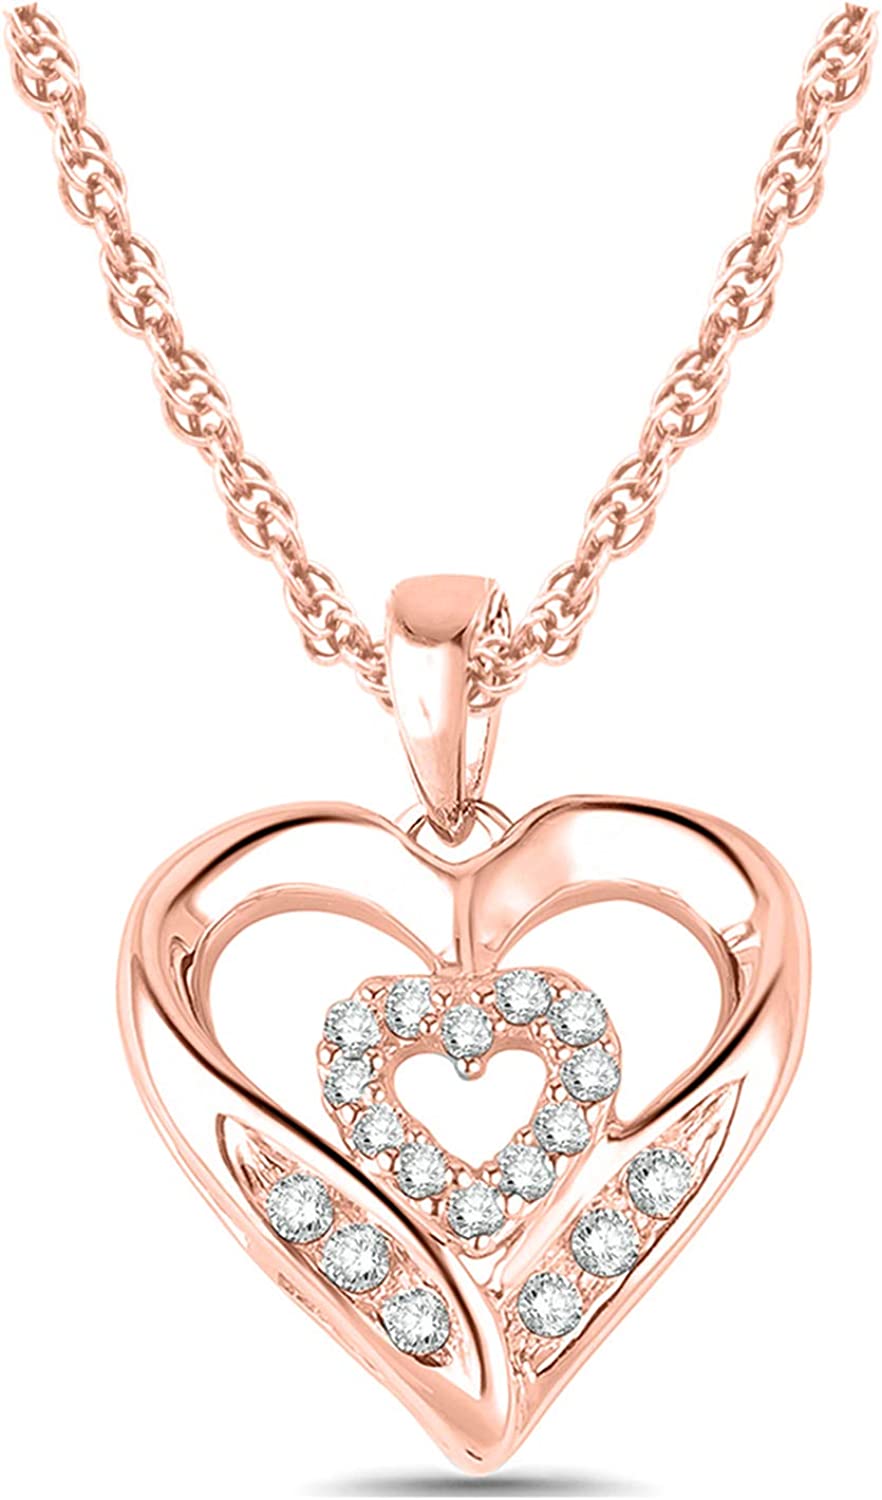 10K Yellow, Rose or White Gold Diamond Heart Necklace For Women Rose Gold Chain